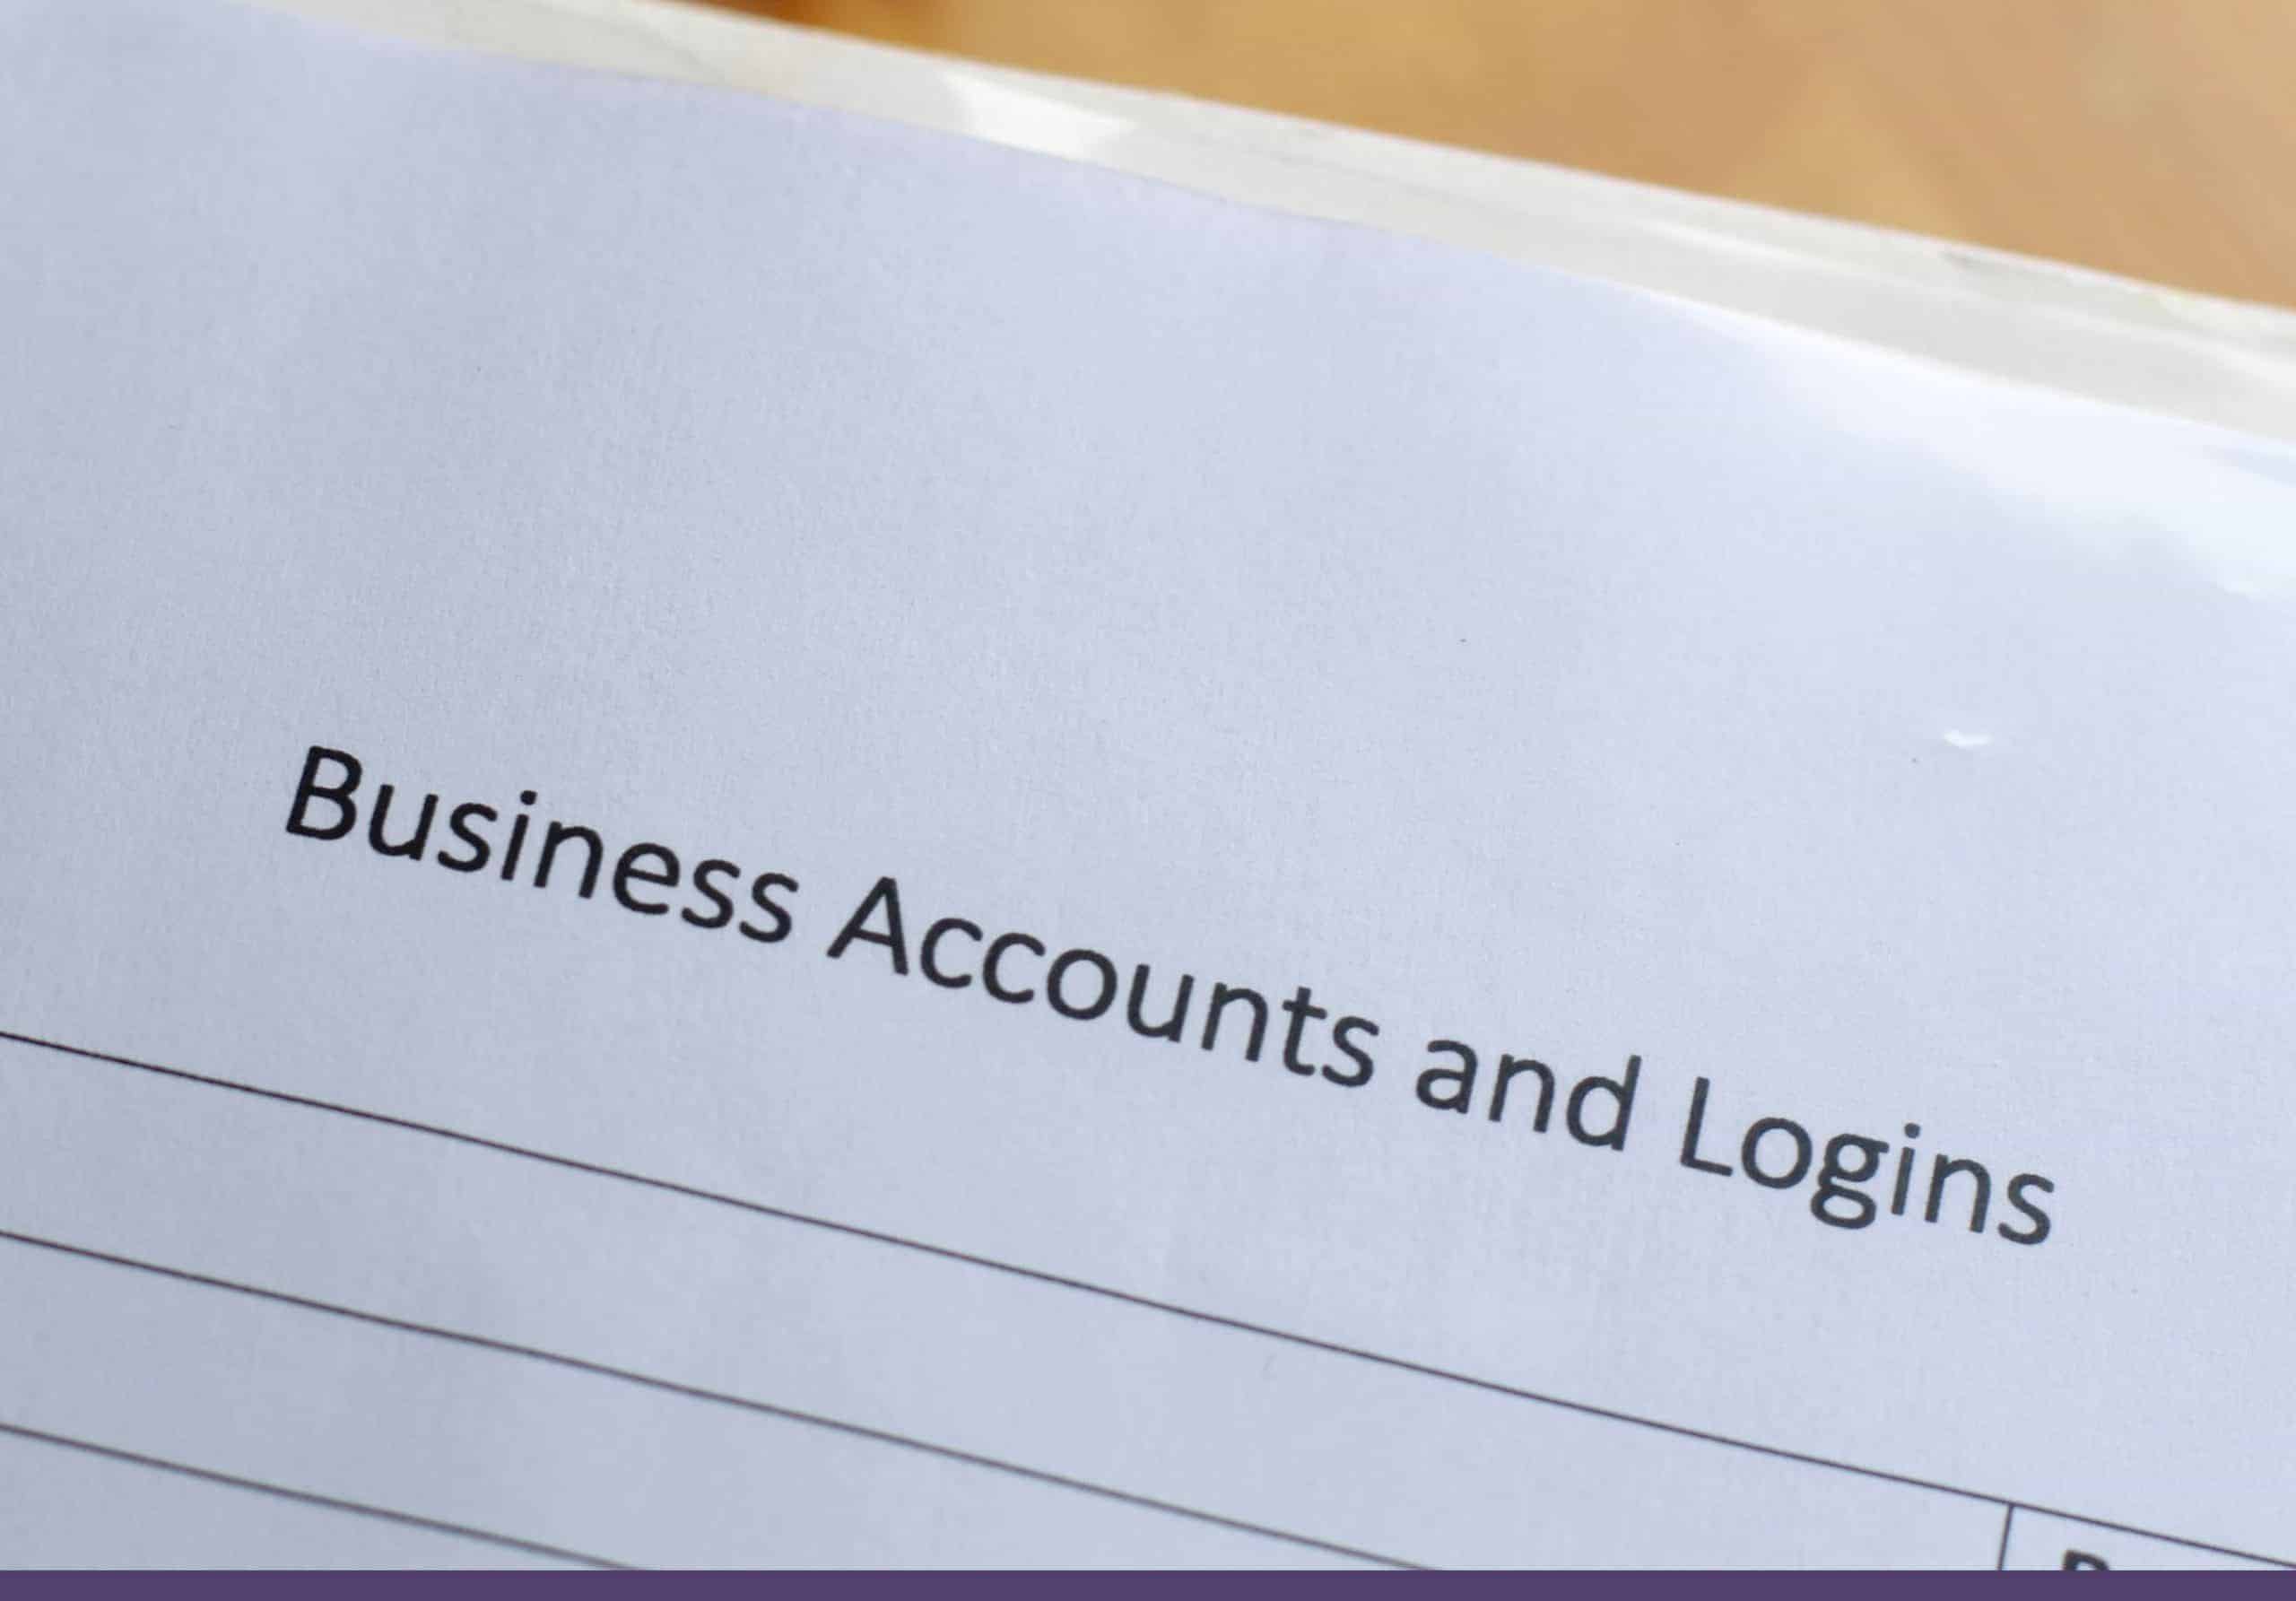 Business Accounts and Logins form 